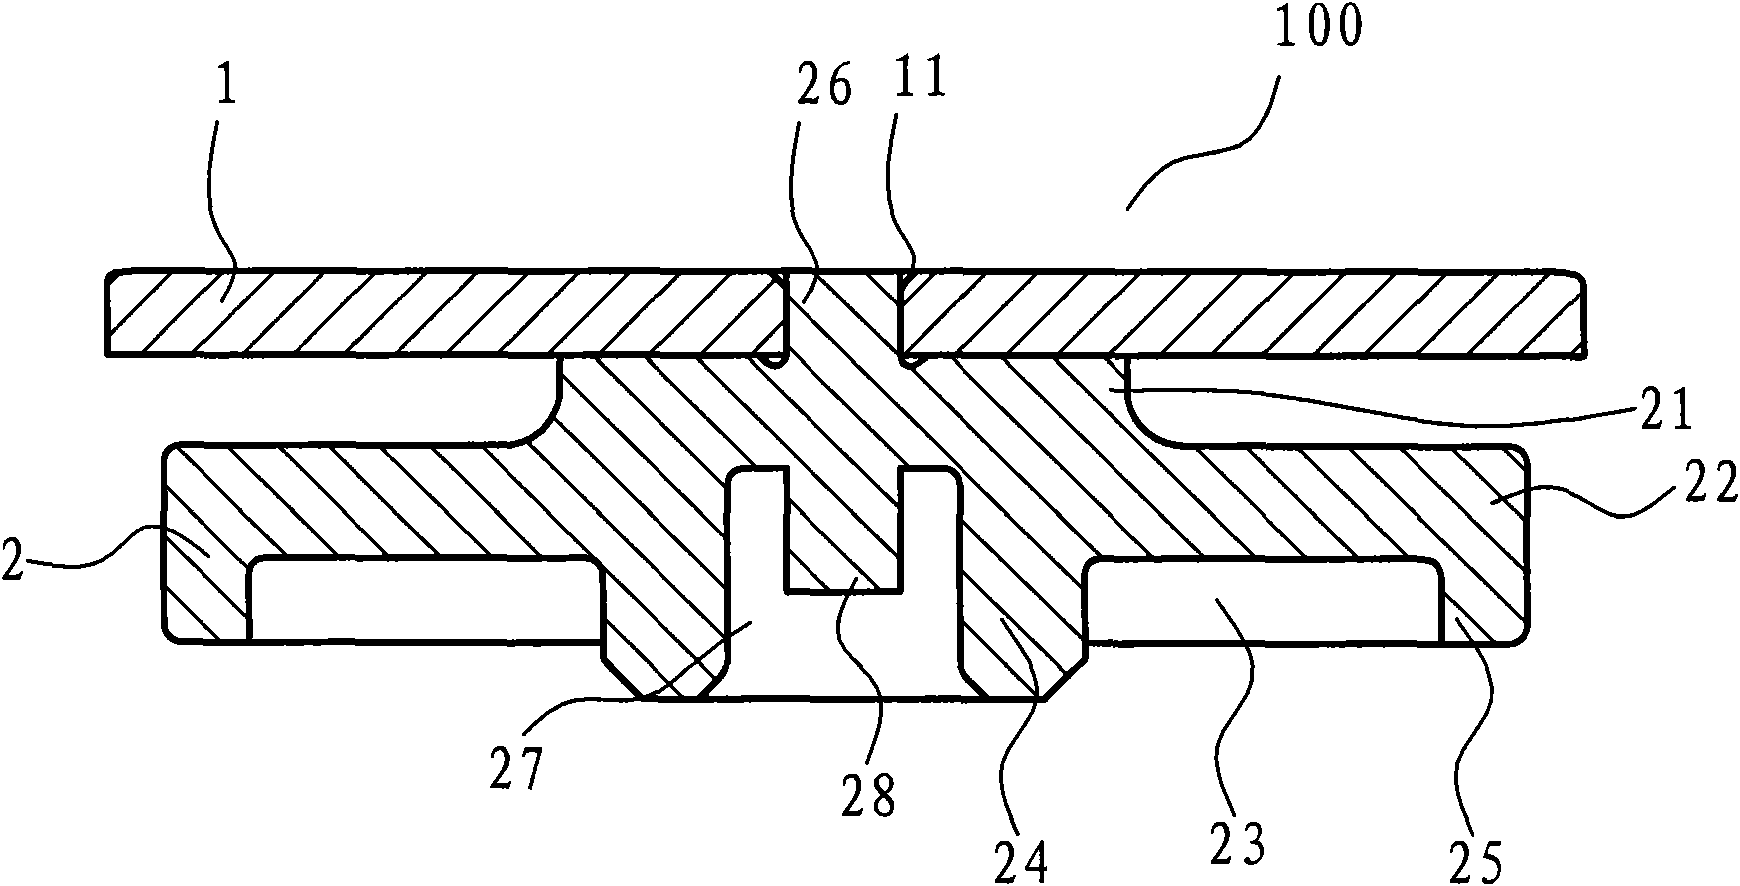 Expansion valve and diaphragm support structure thereof